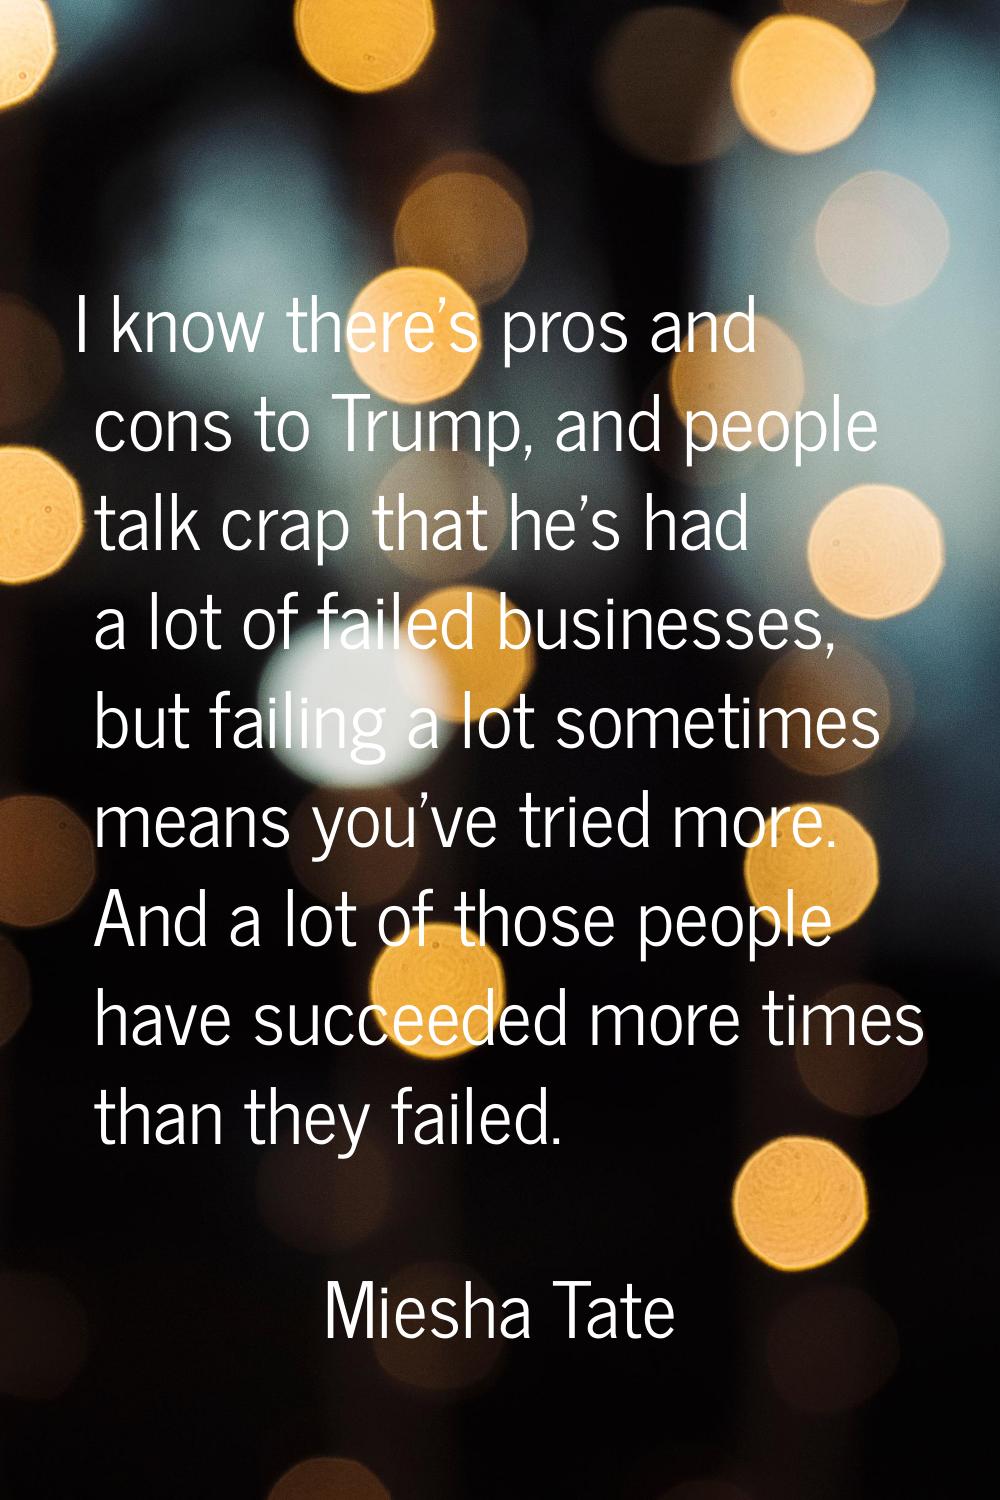 I know there's pros and cons to Trump, and people talk crap that he's had a lot of failed businesse